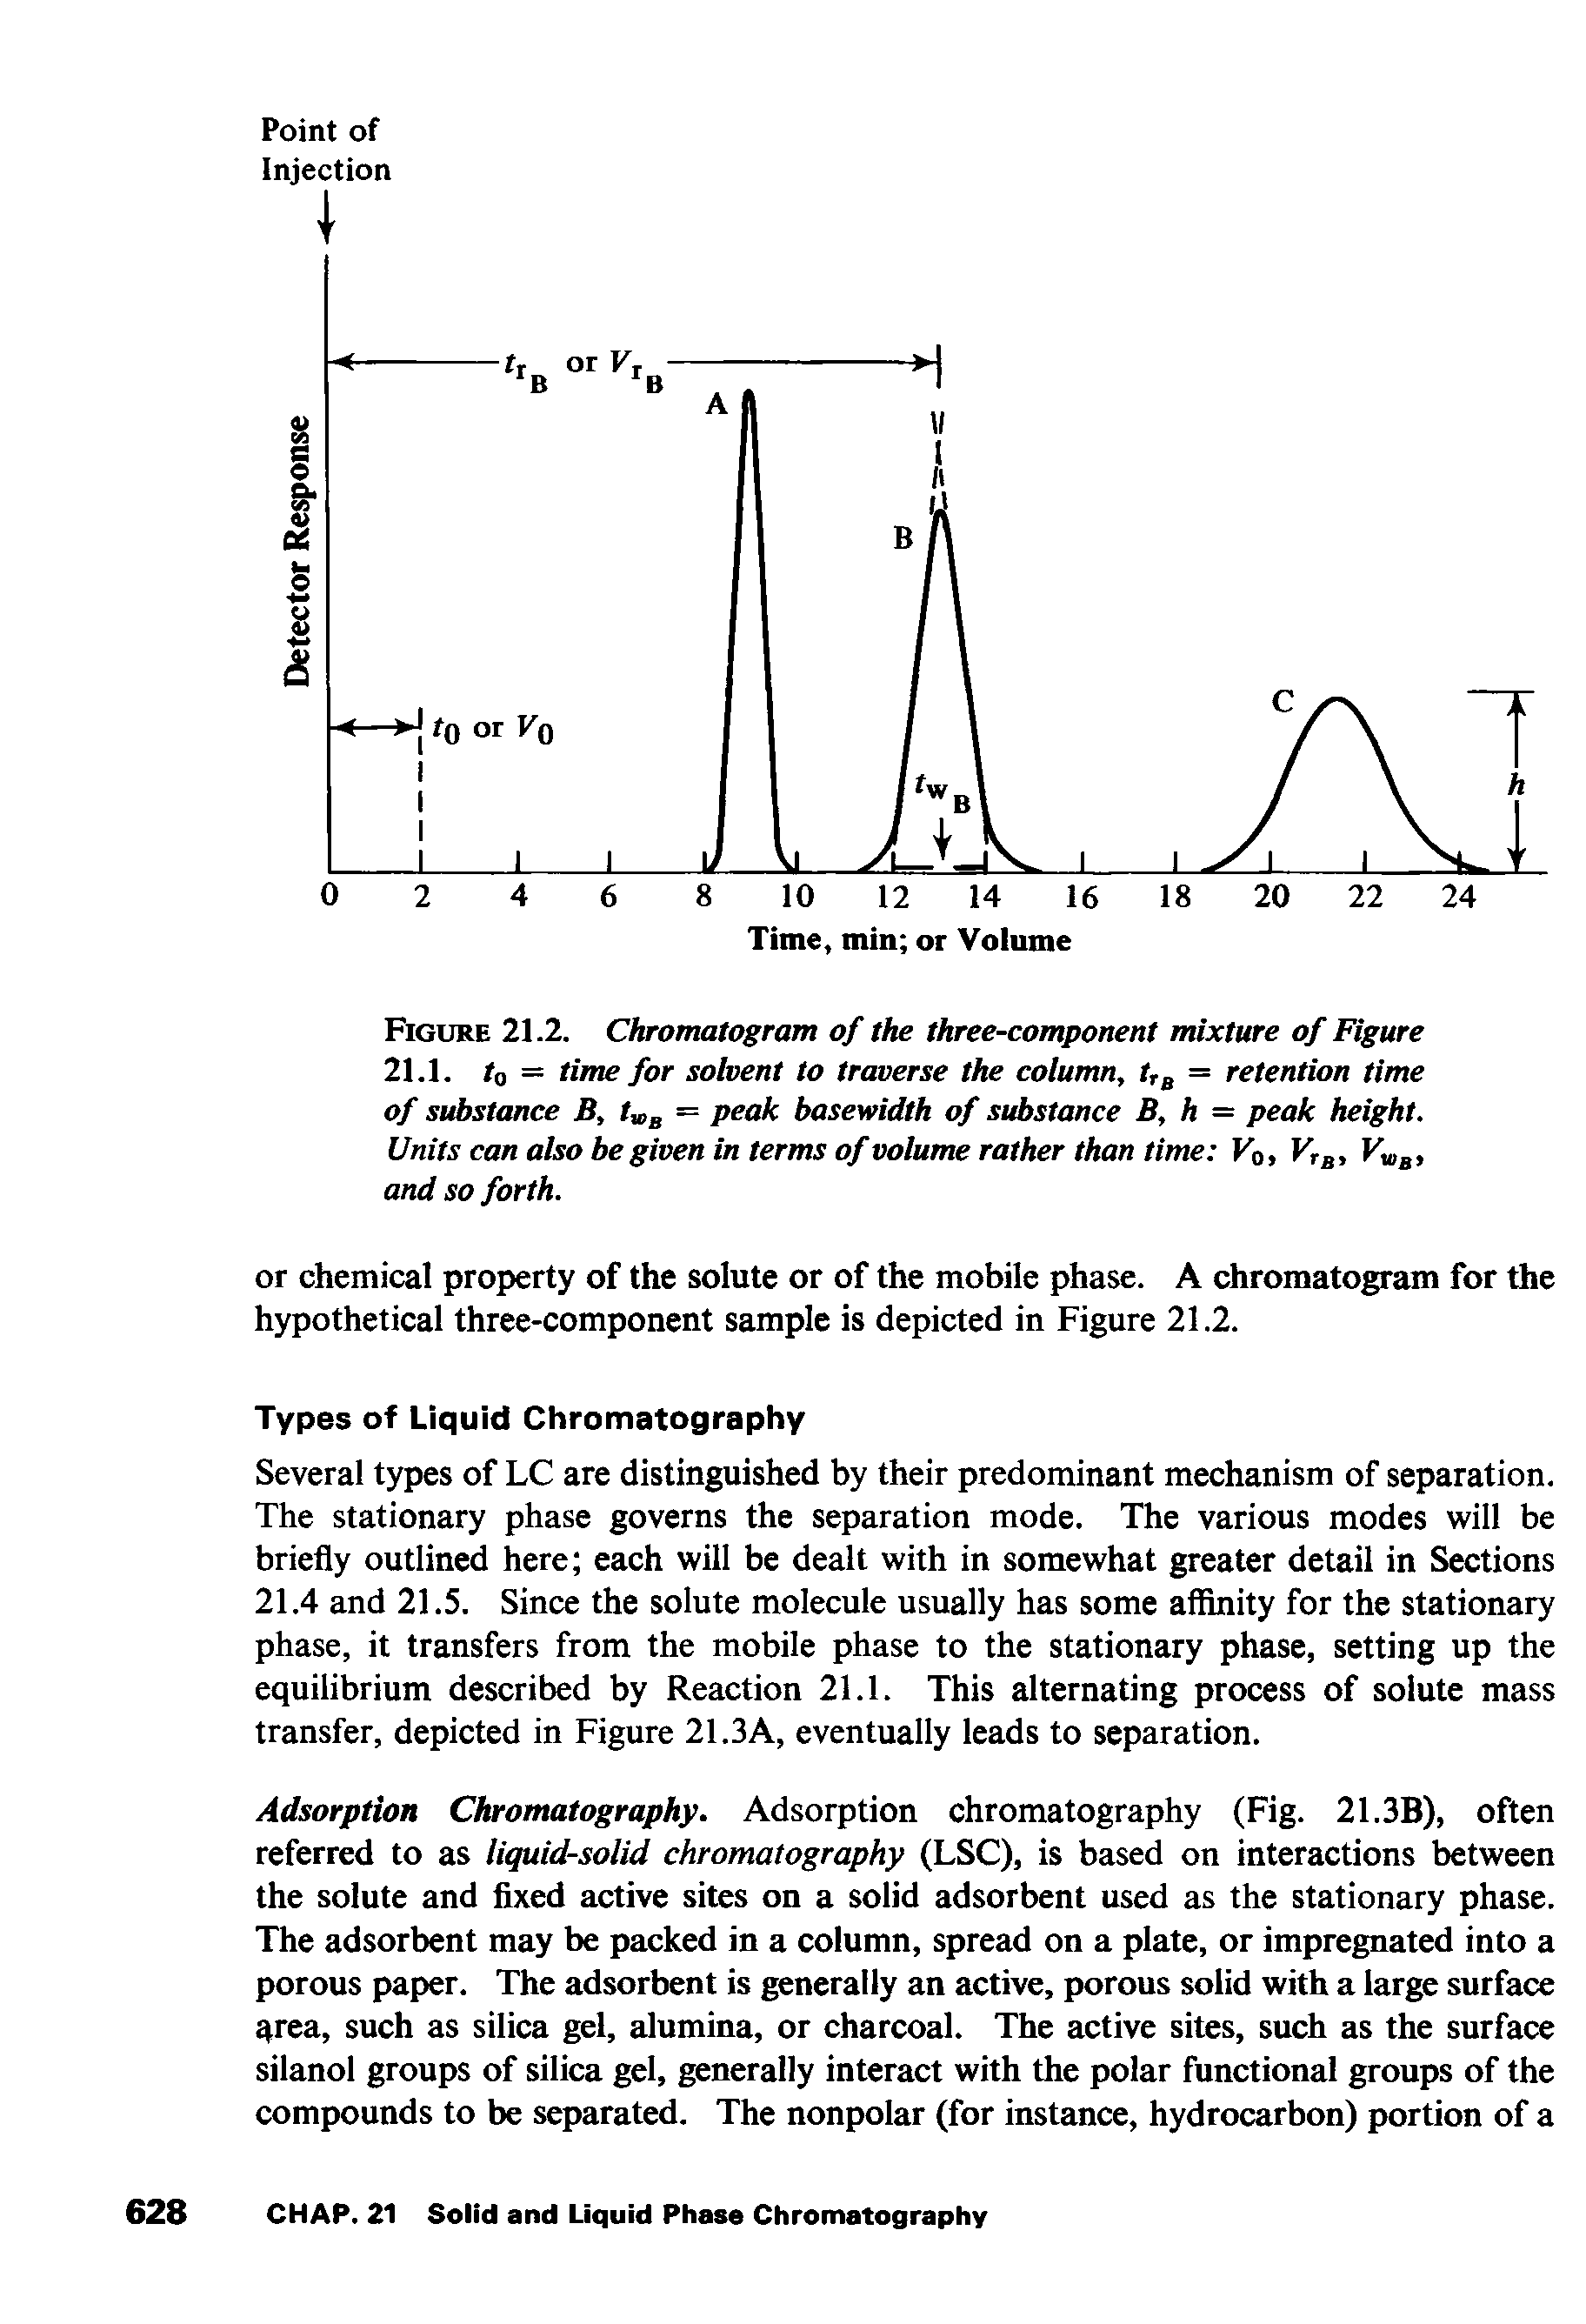 Figure 21.2. Chromatogram of the three-component mixture of Figure 21.1. to = time for solvent to traverse the column, = retention time of substance B, ty,g = peak basewidth of substance B, h = peak height.